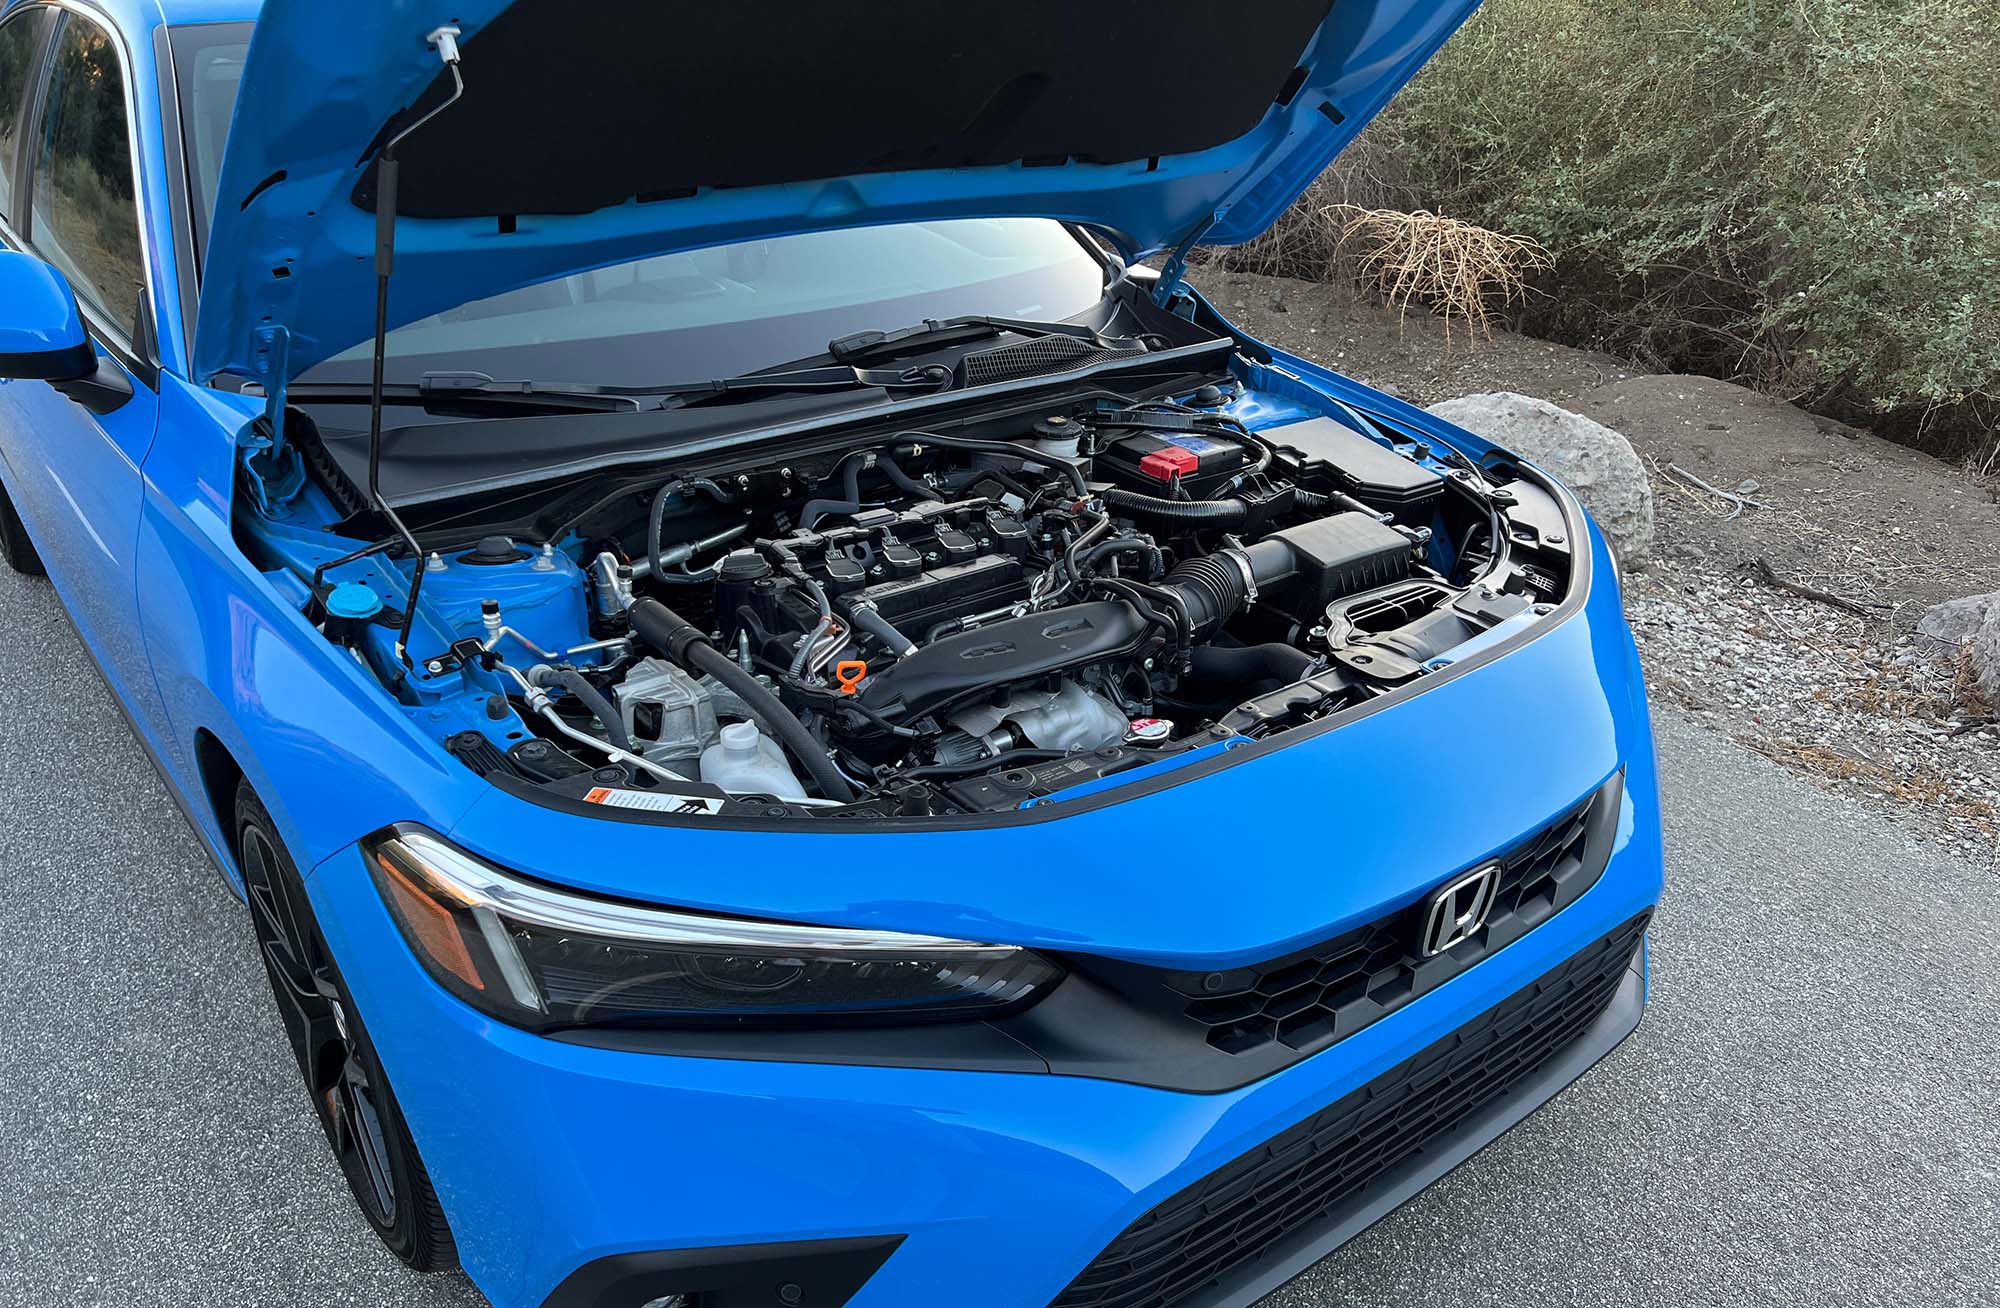 2024 Honda Civic Hatchback in bright blue with hood up and engine exposed